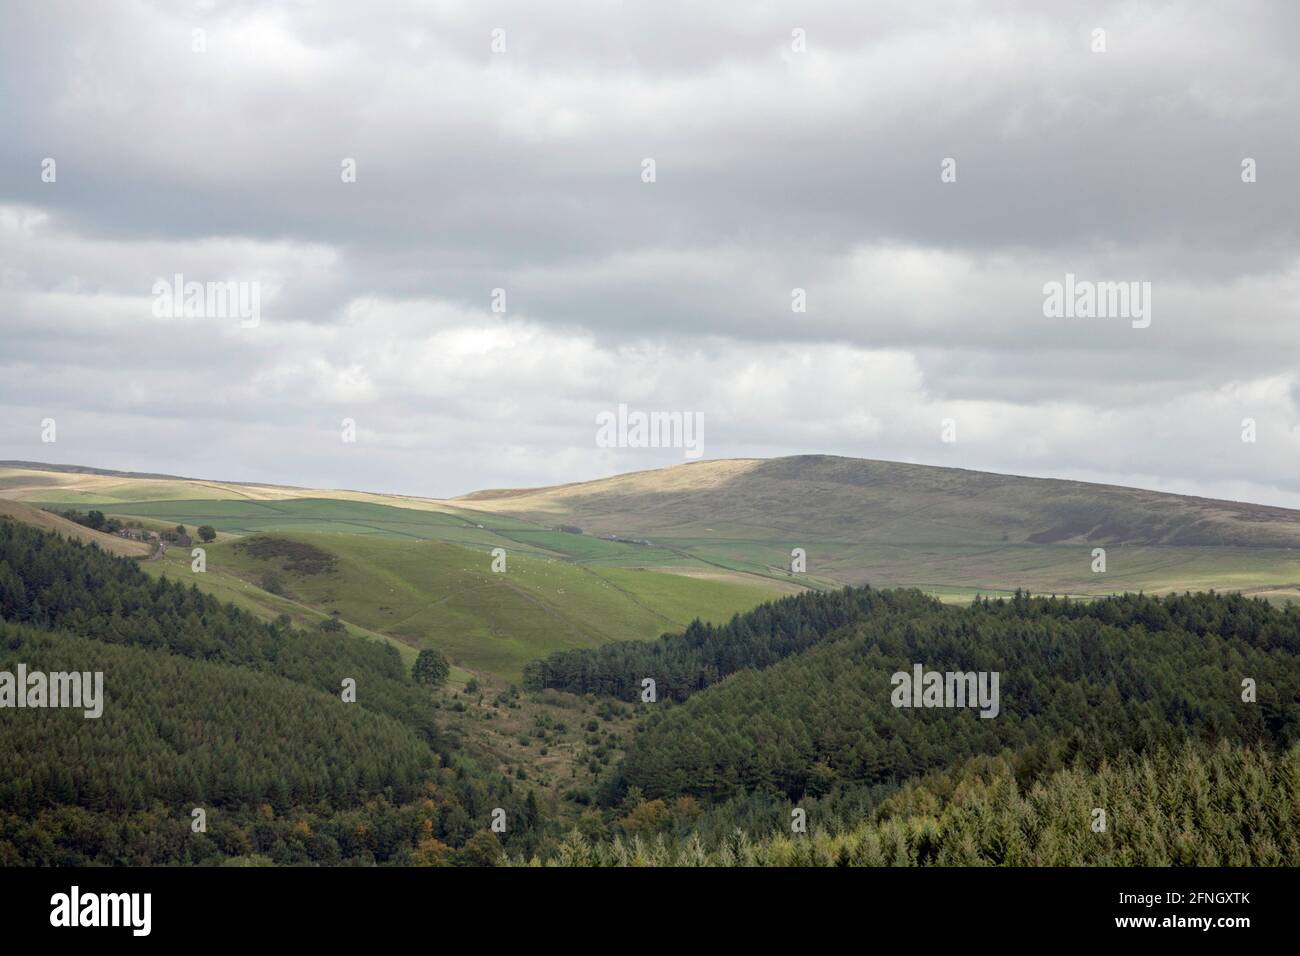 Shining Tor viewed from the Macclesfield Forest near Macclesfield Cheshire England Stock Photo